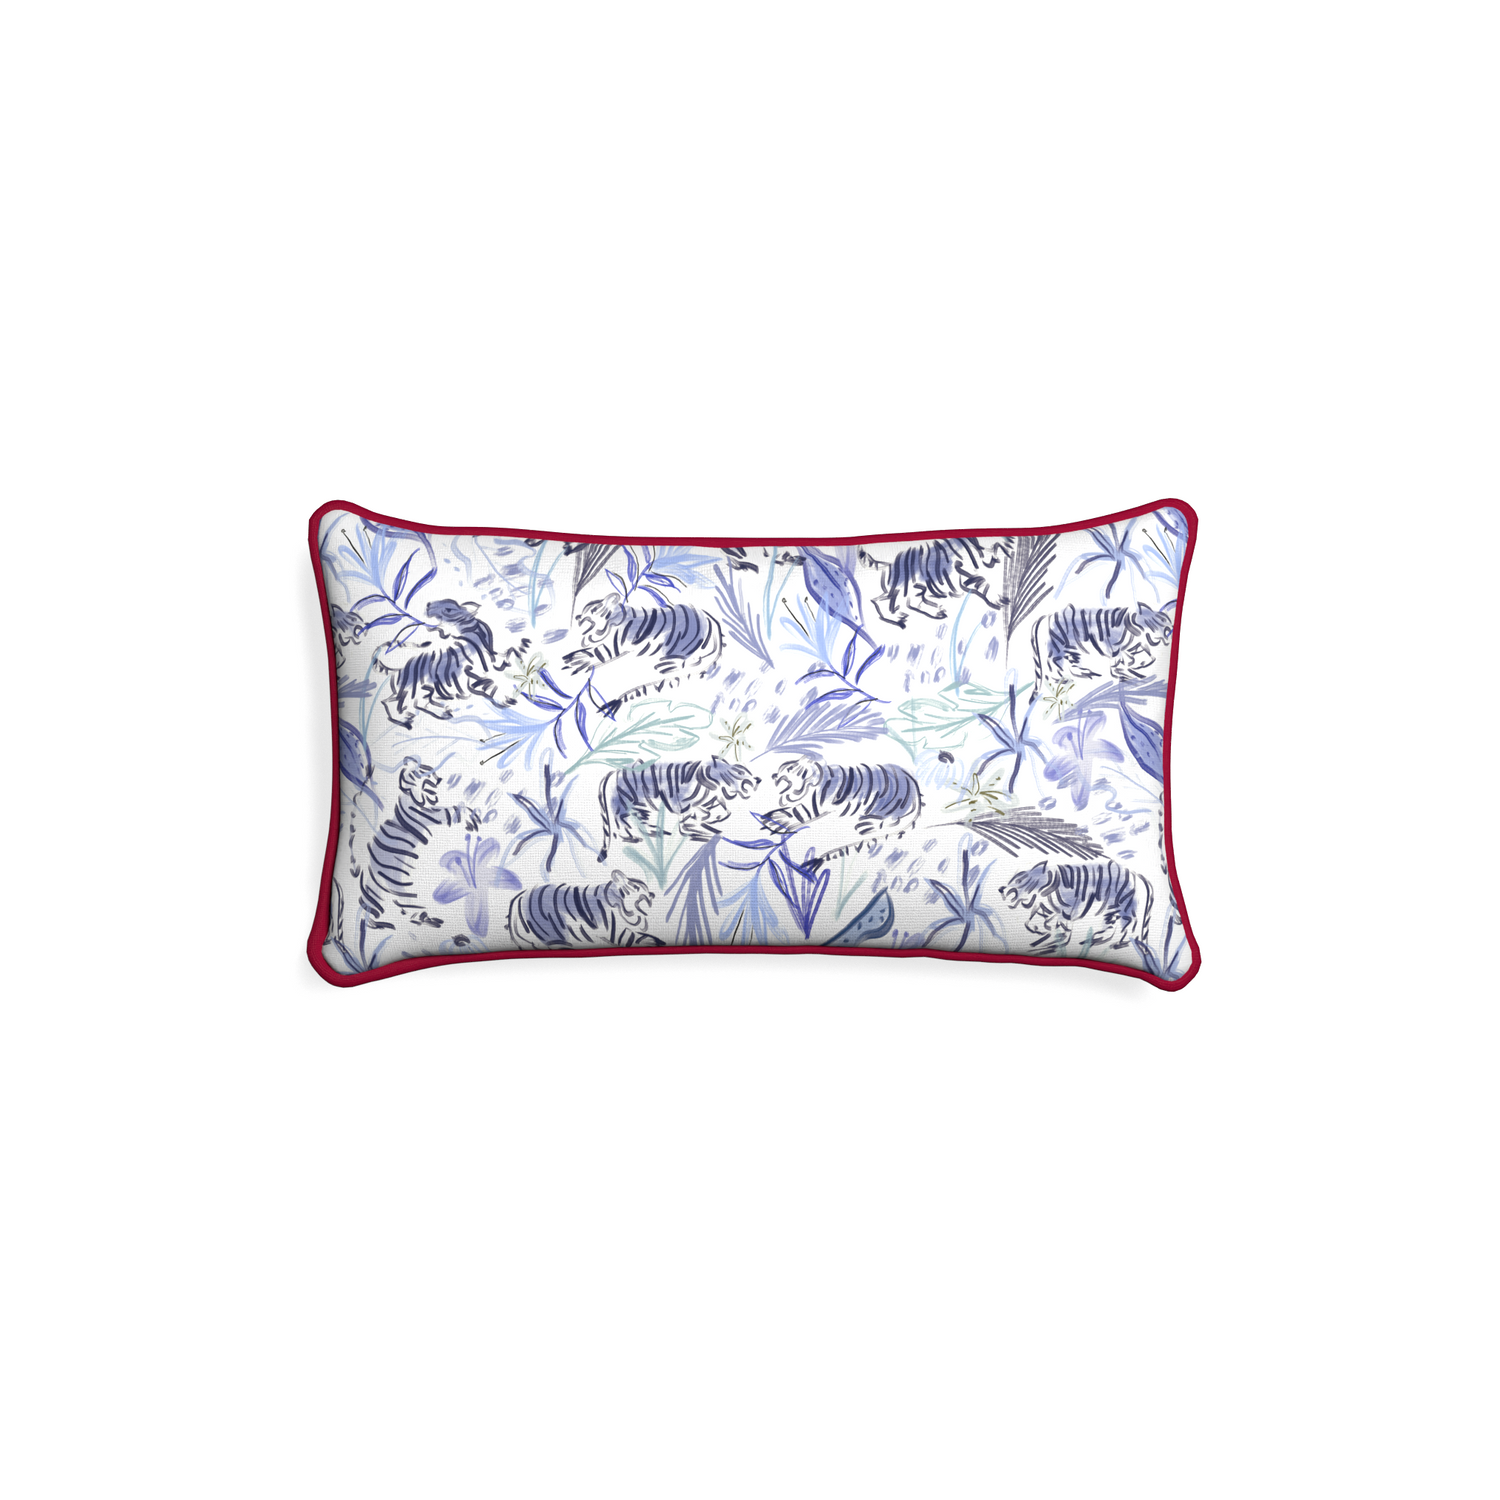 Petite-lumbar frida blue custom blue with intricate tiger designpillow with raspberry piping on white background